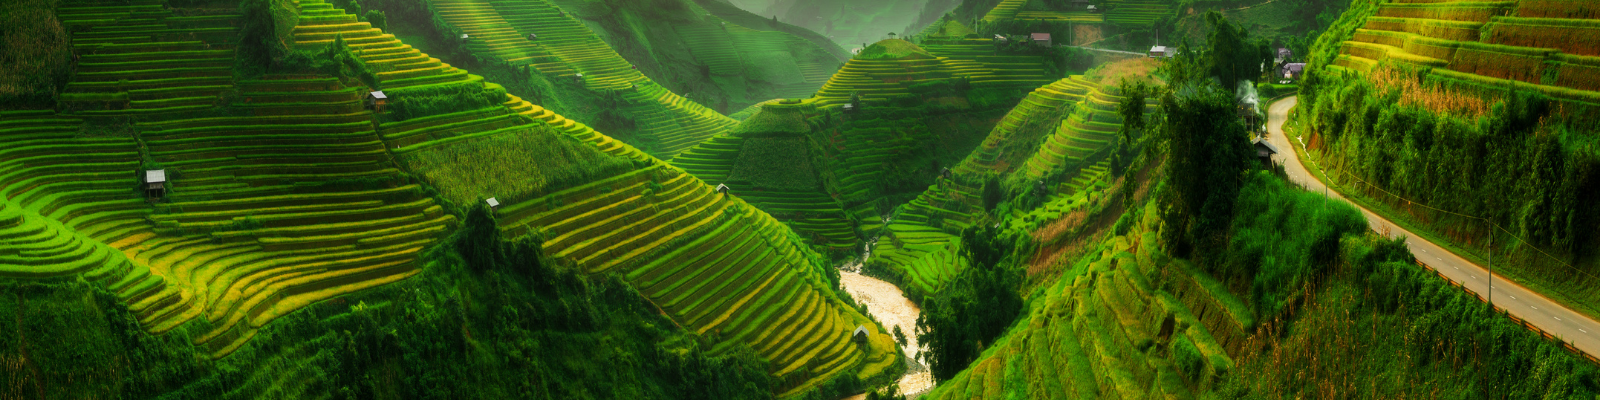 vibrant green terraced rice field with a river snaking through it in Vietnam